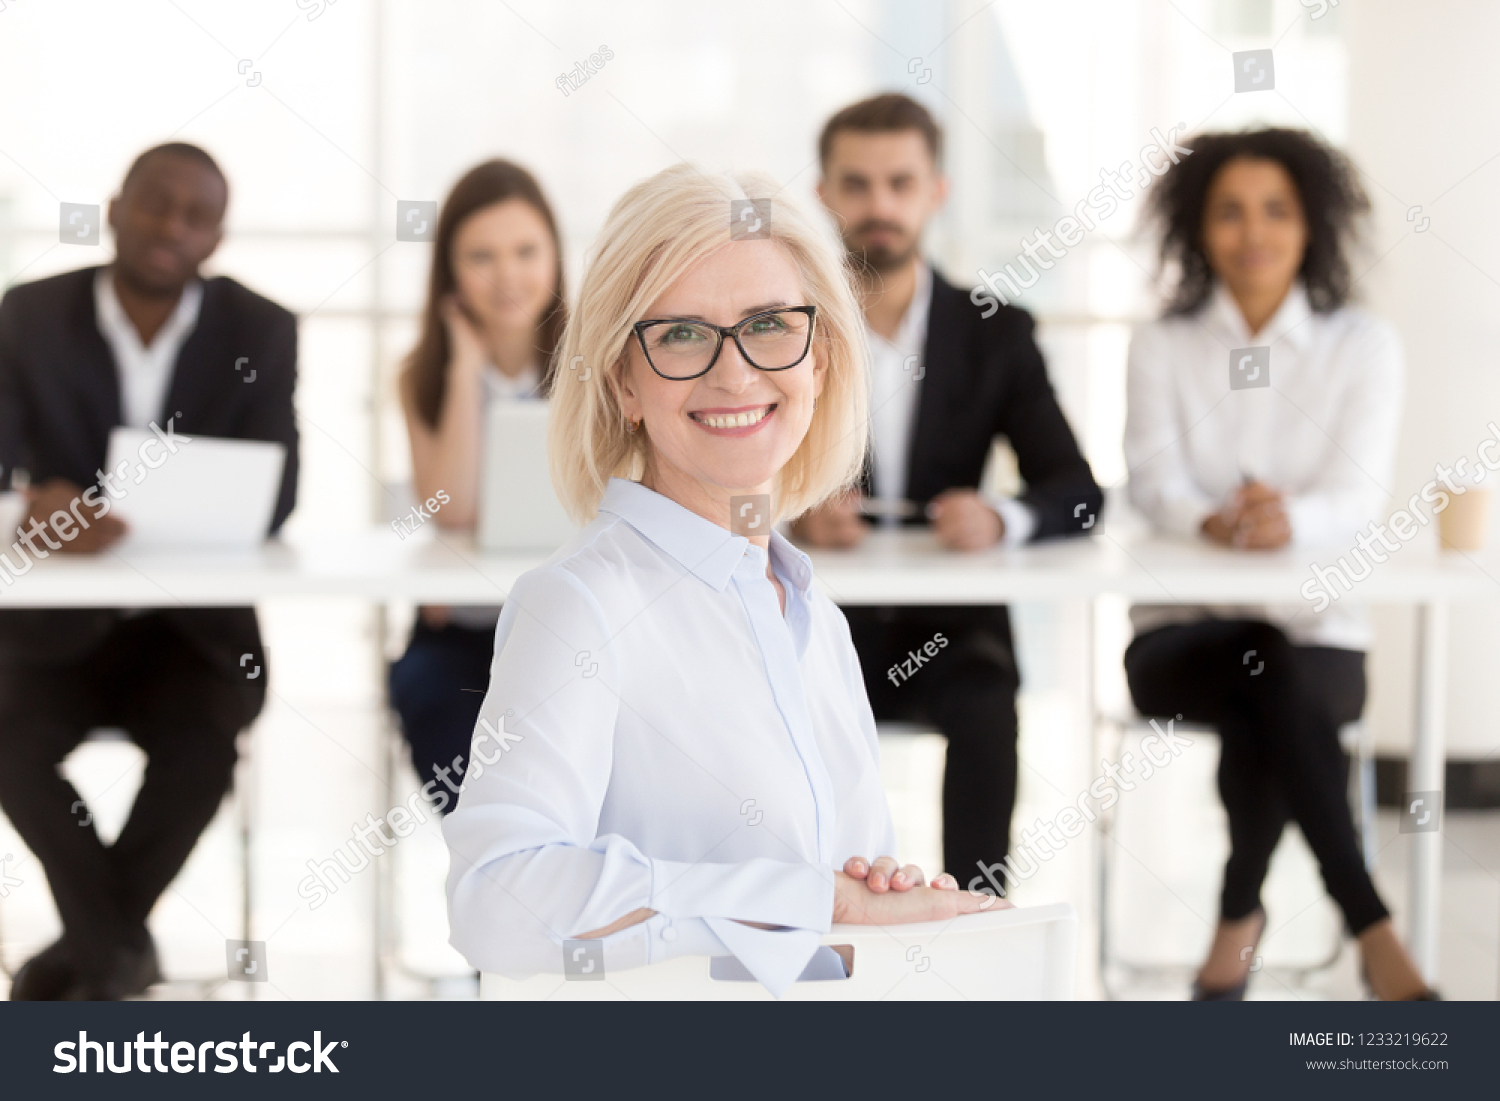 Smiling senior mature woman job applicant looks at camera at interview with hr recruiting team, happy middle aged lady business coach or vacancy candidate portrait, getting hired, employment concept #1233219622